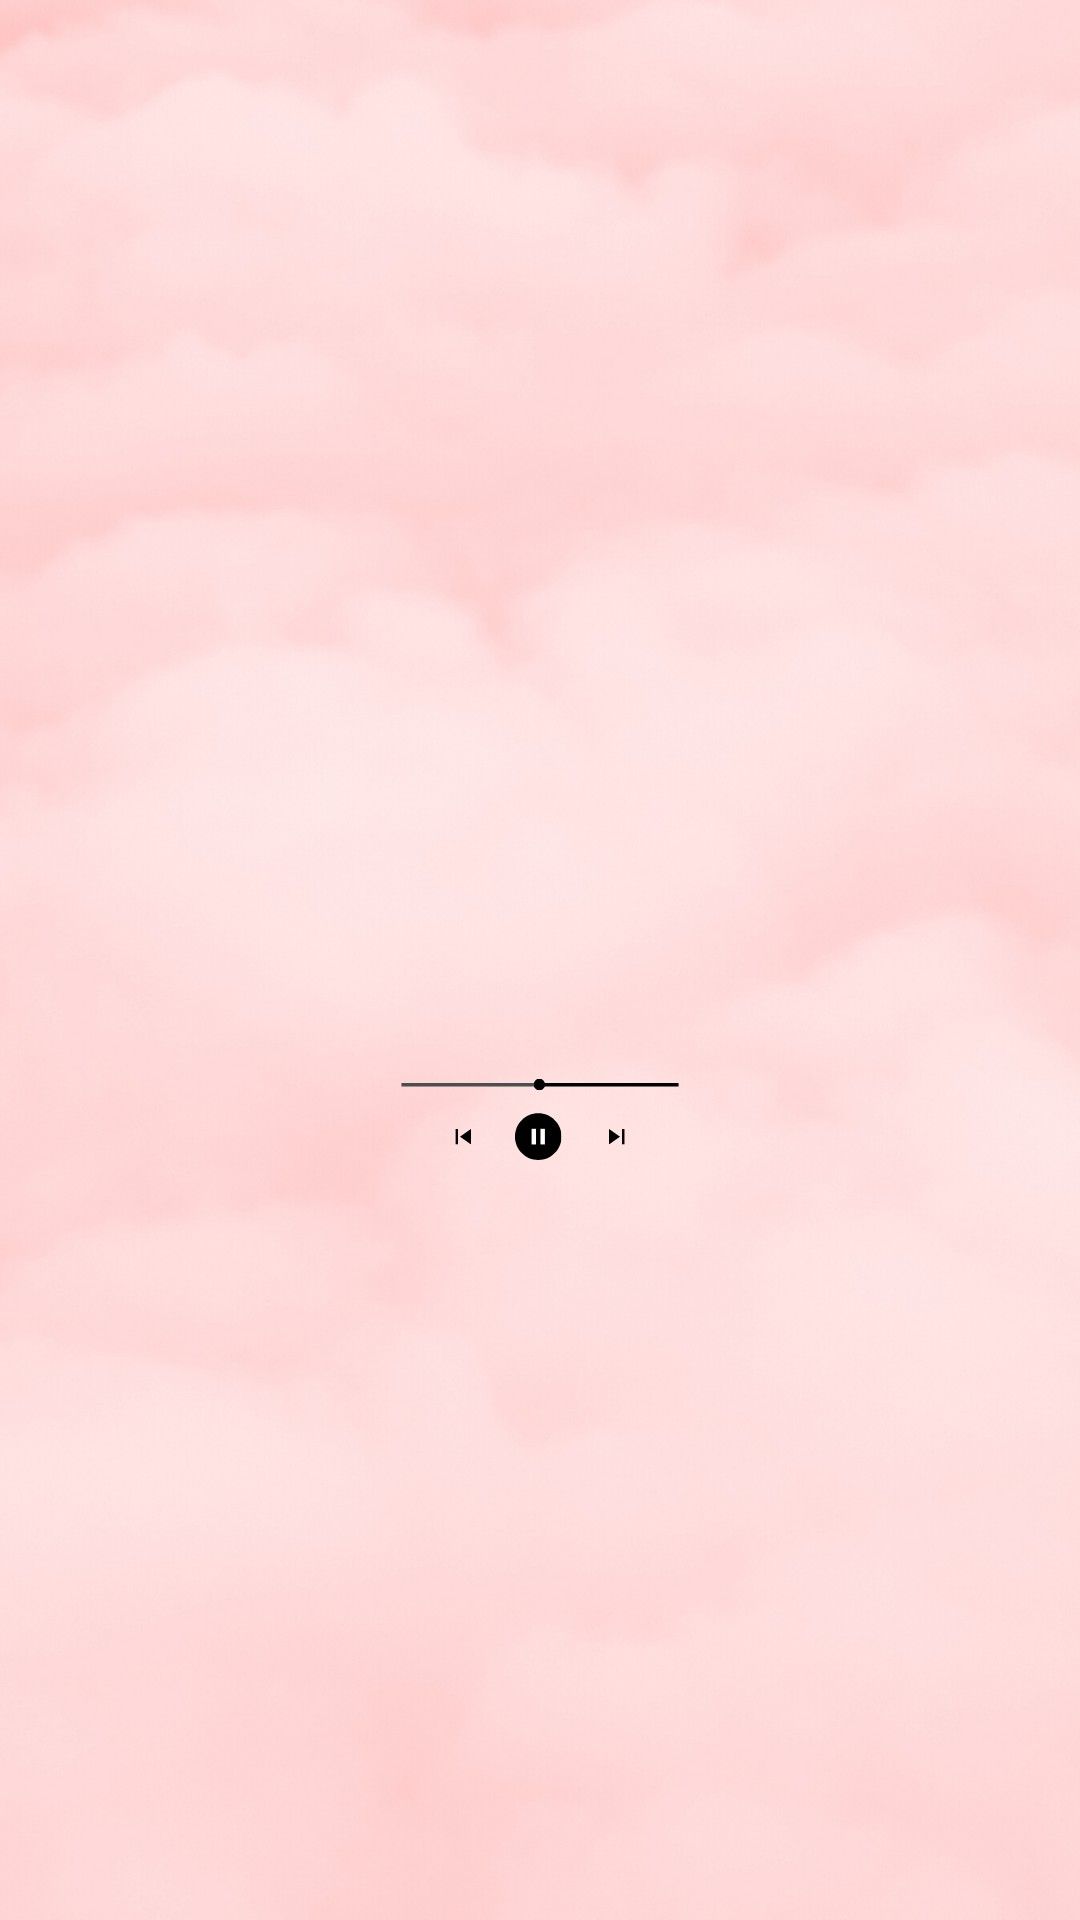 sky #pastel #clouds #wallpaper #blue #pink #aesthetic #clean #music #player #wallpape. Pink wallpaper iphone, Wallpaper pink and blue, Aesthetic iphone wallpaper